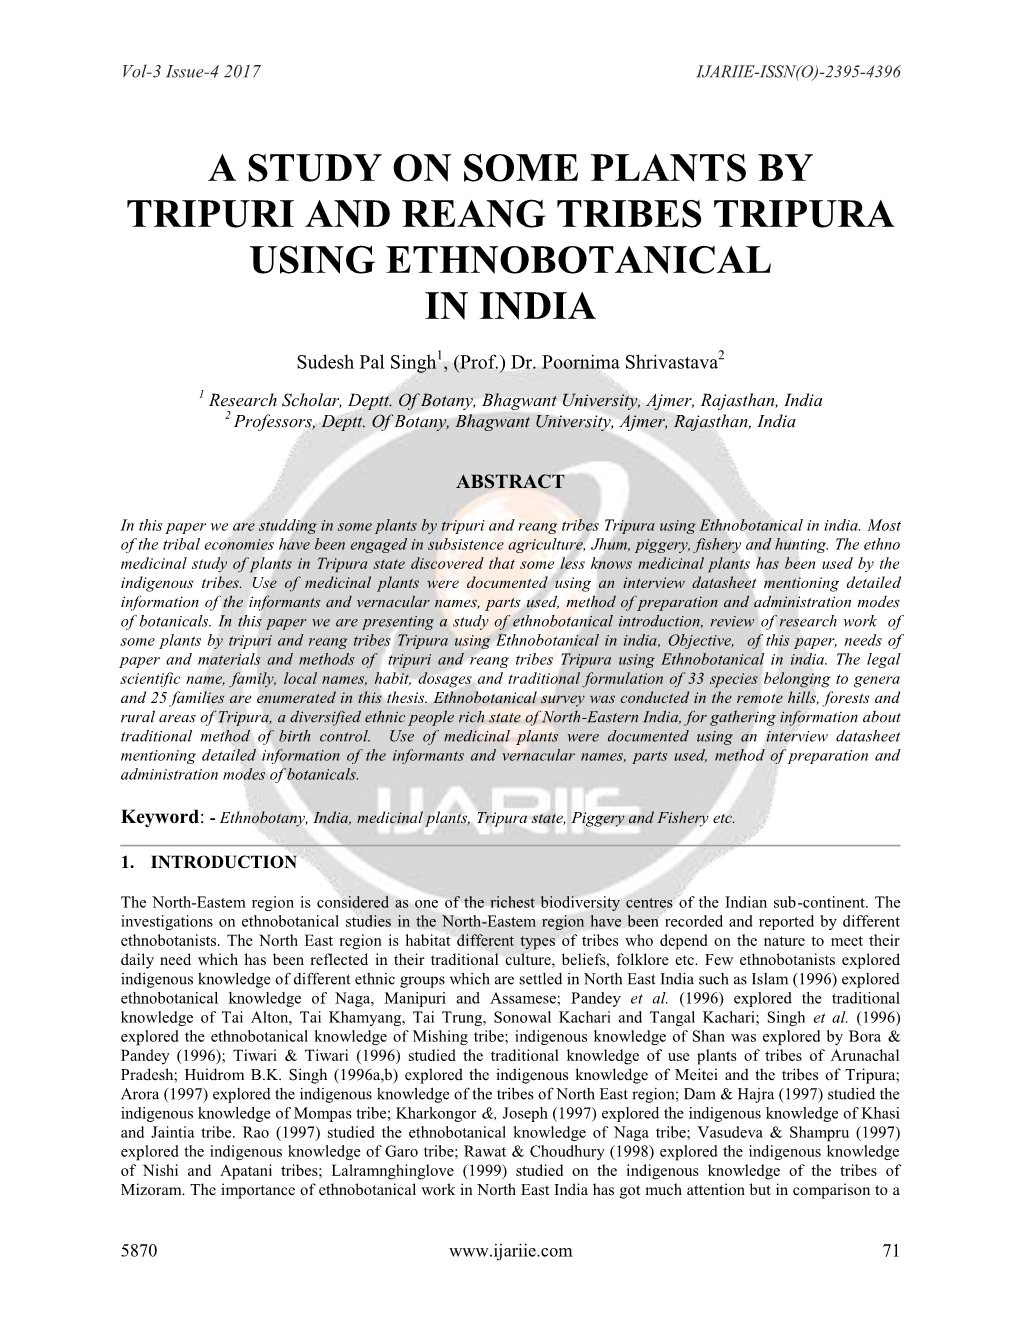 A Study on Some Plants by Tripuri and Reang Tribes Tripura Using Ethnobotanical in India